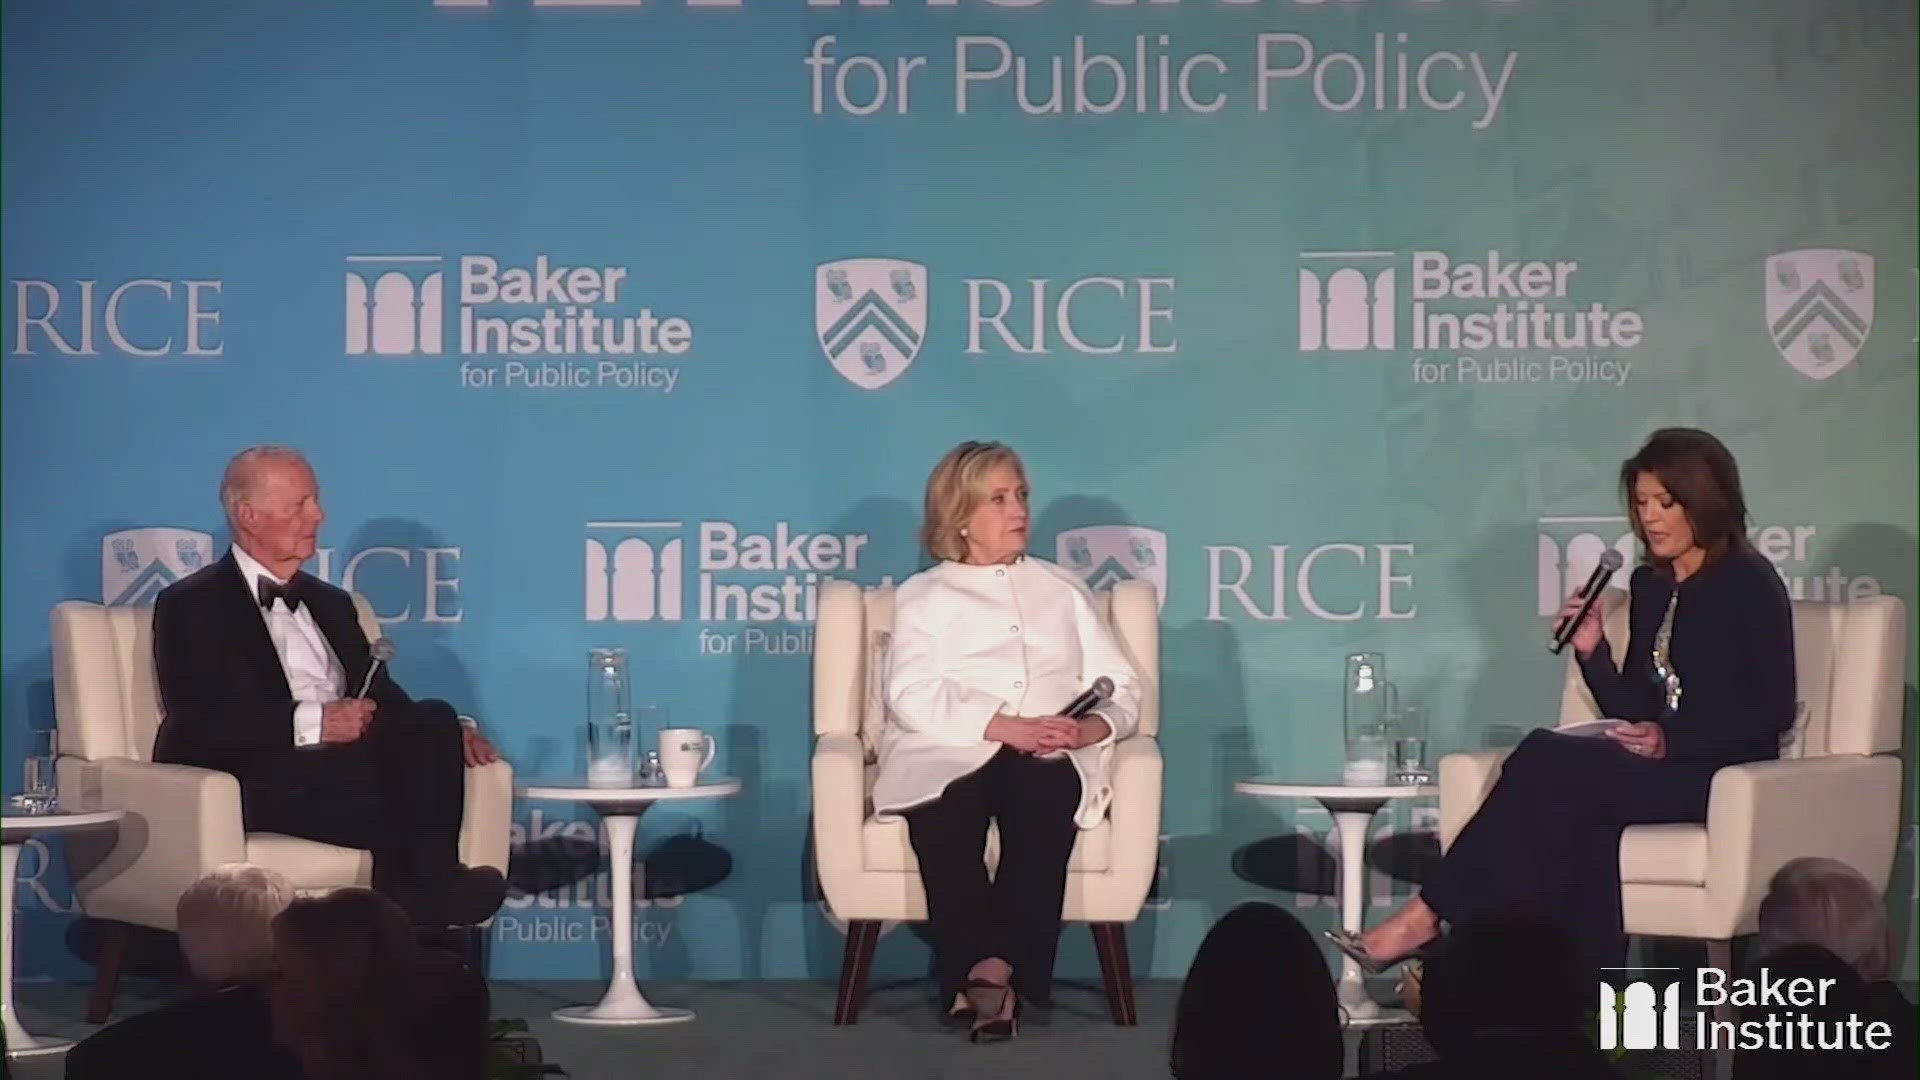 Former U.S. Secretaries of State joined CBS Evening News' Norah O'Donnell for the 30th anniversary of the Baker Institute at Rice University Thursday night.